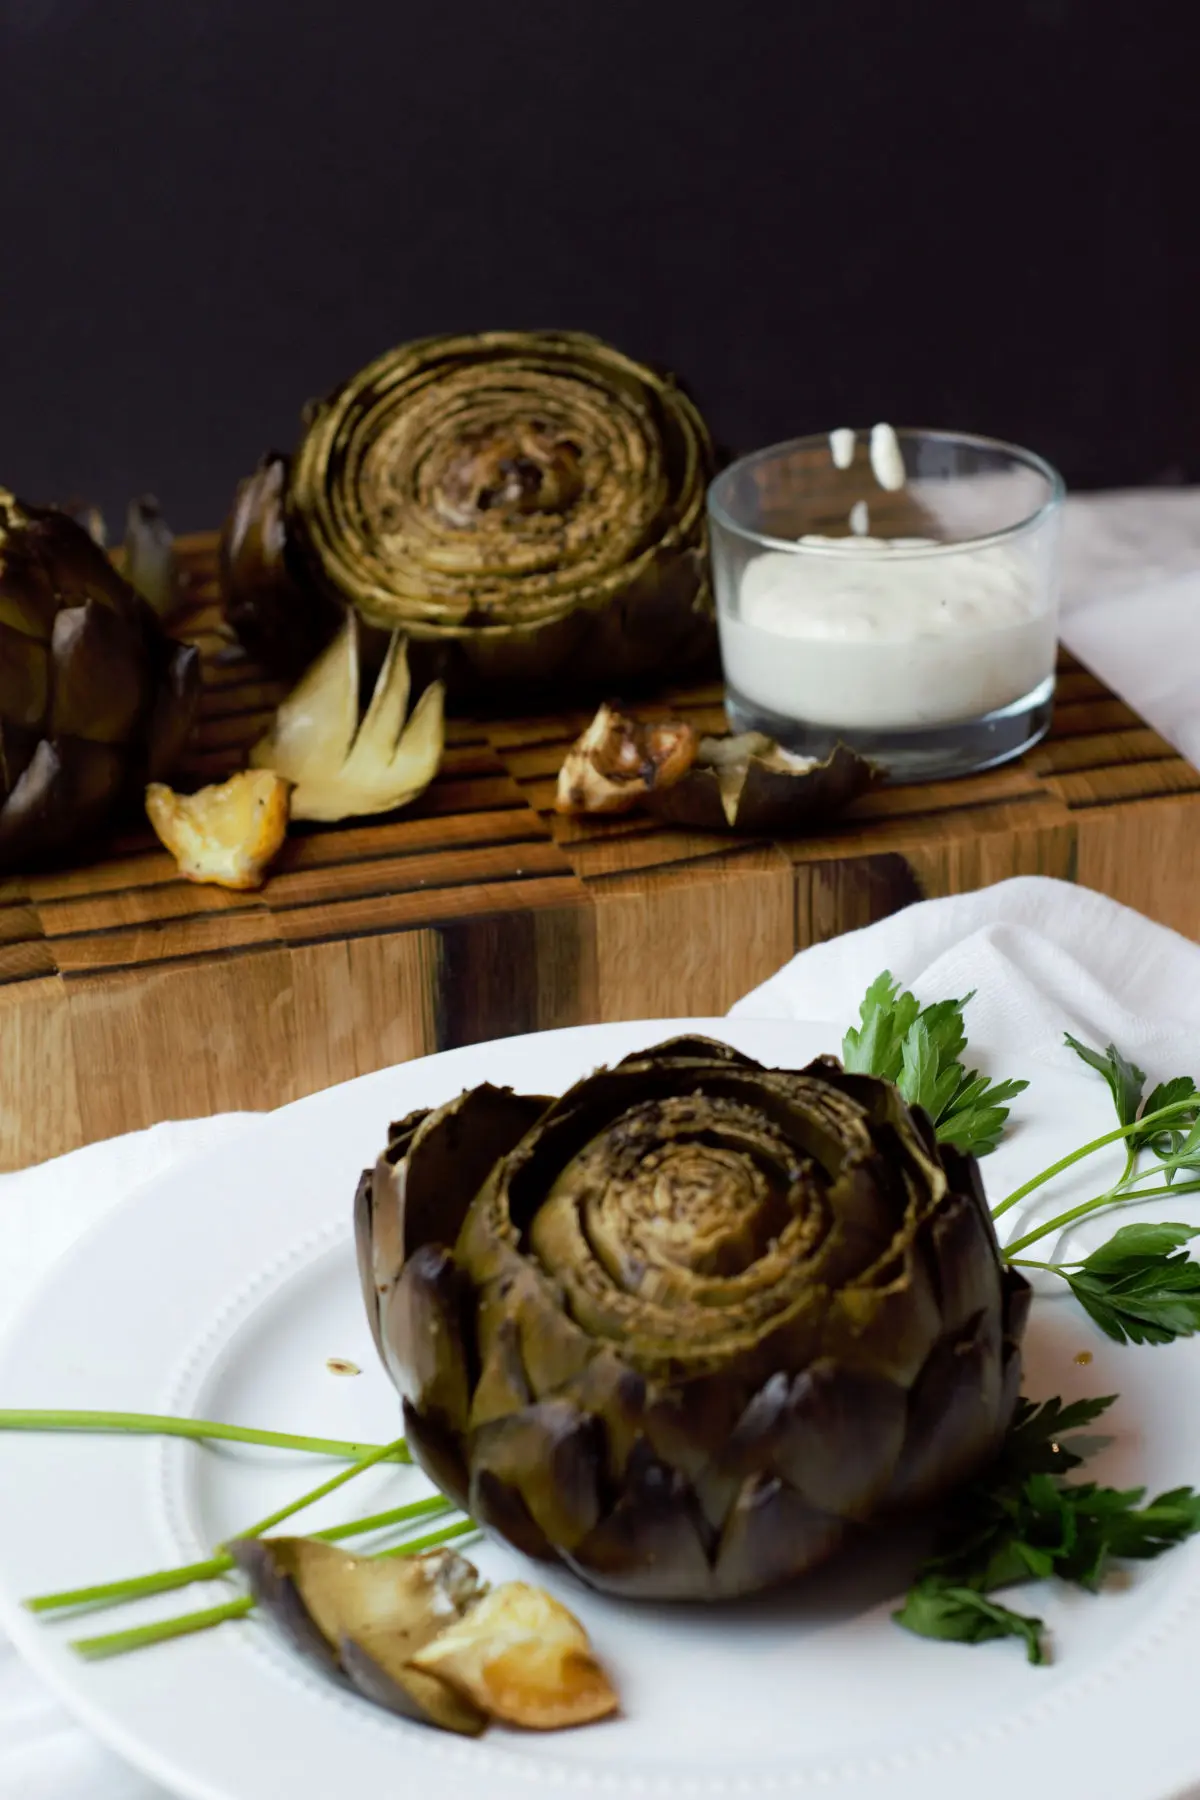 Finished artichokes with dipping sauce